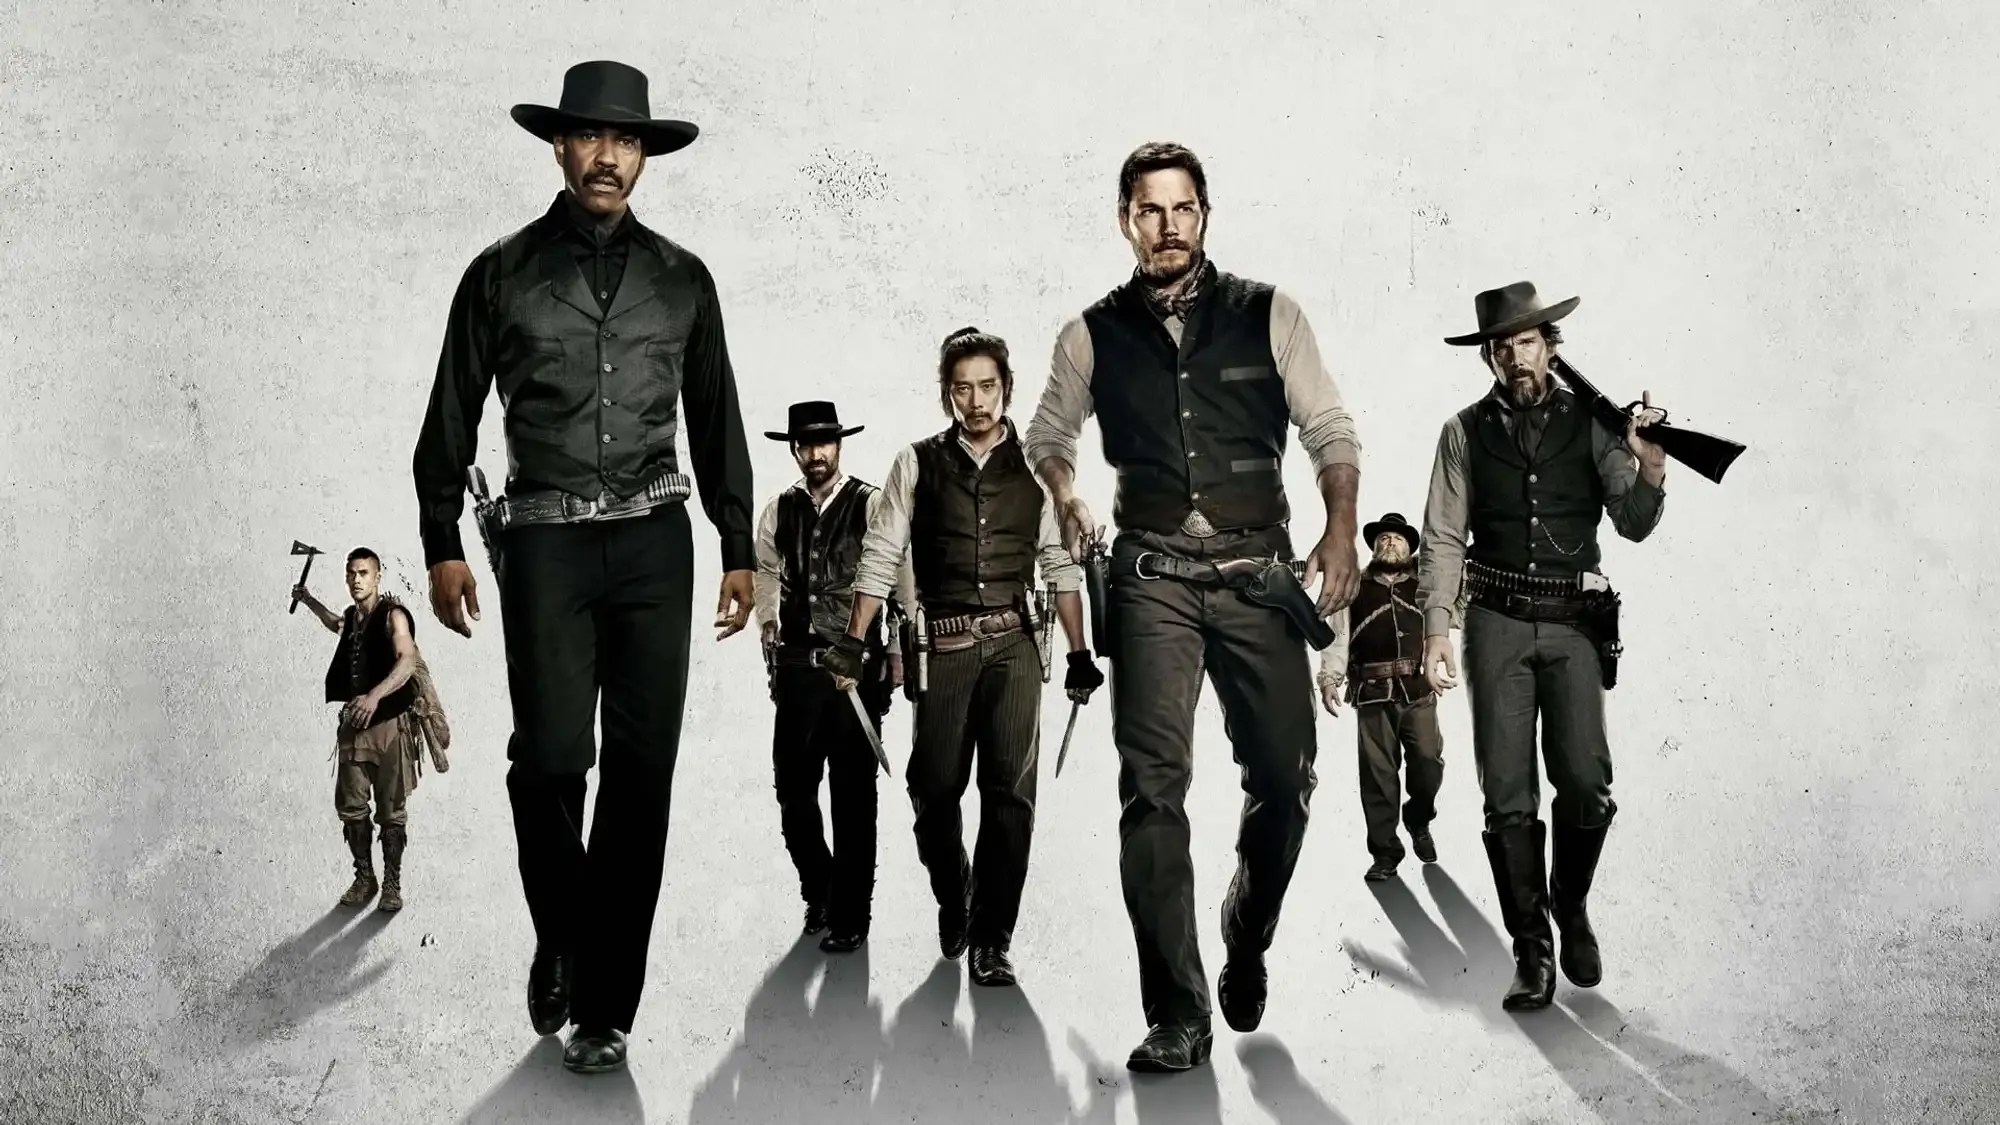 The Magnificent Seven movie review